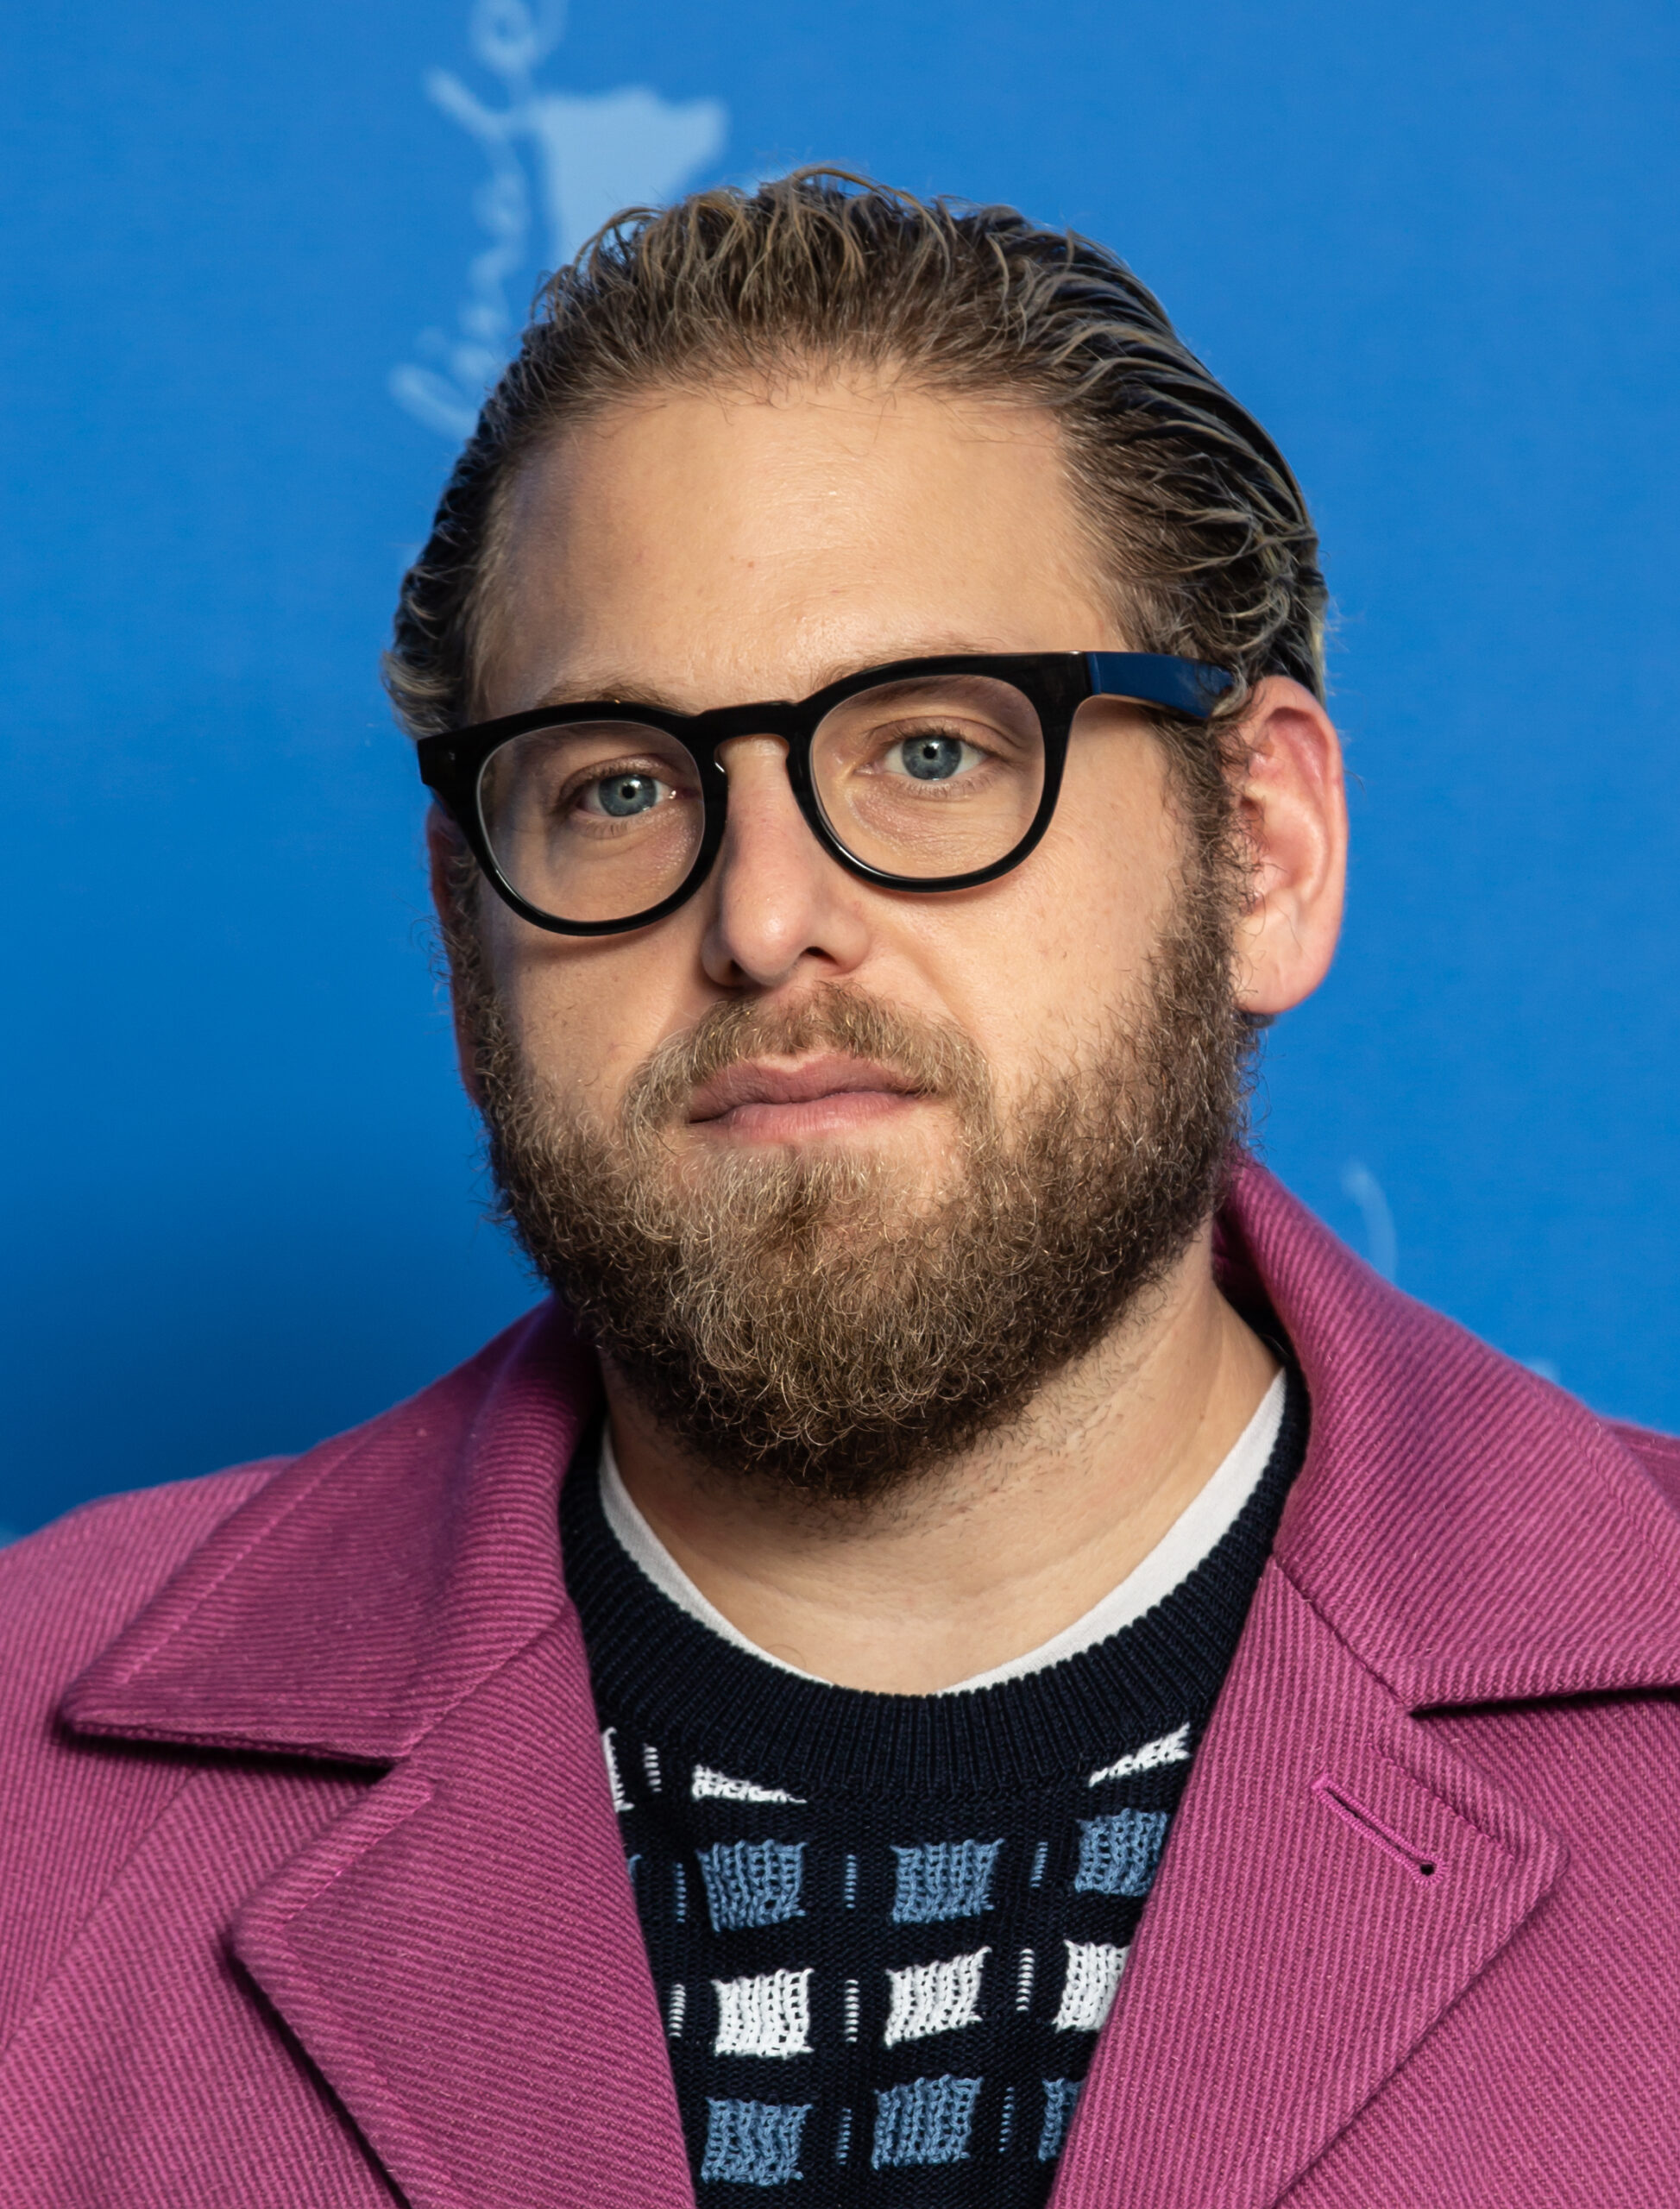 30 Interesting Things Most People Don’t Know About Jonah Hill